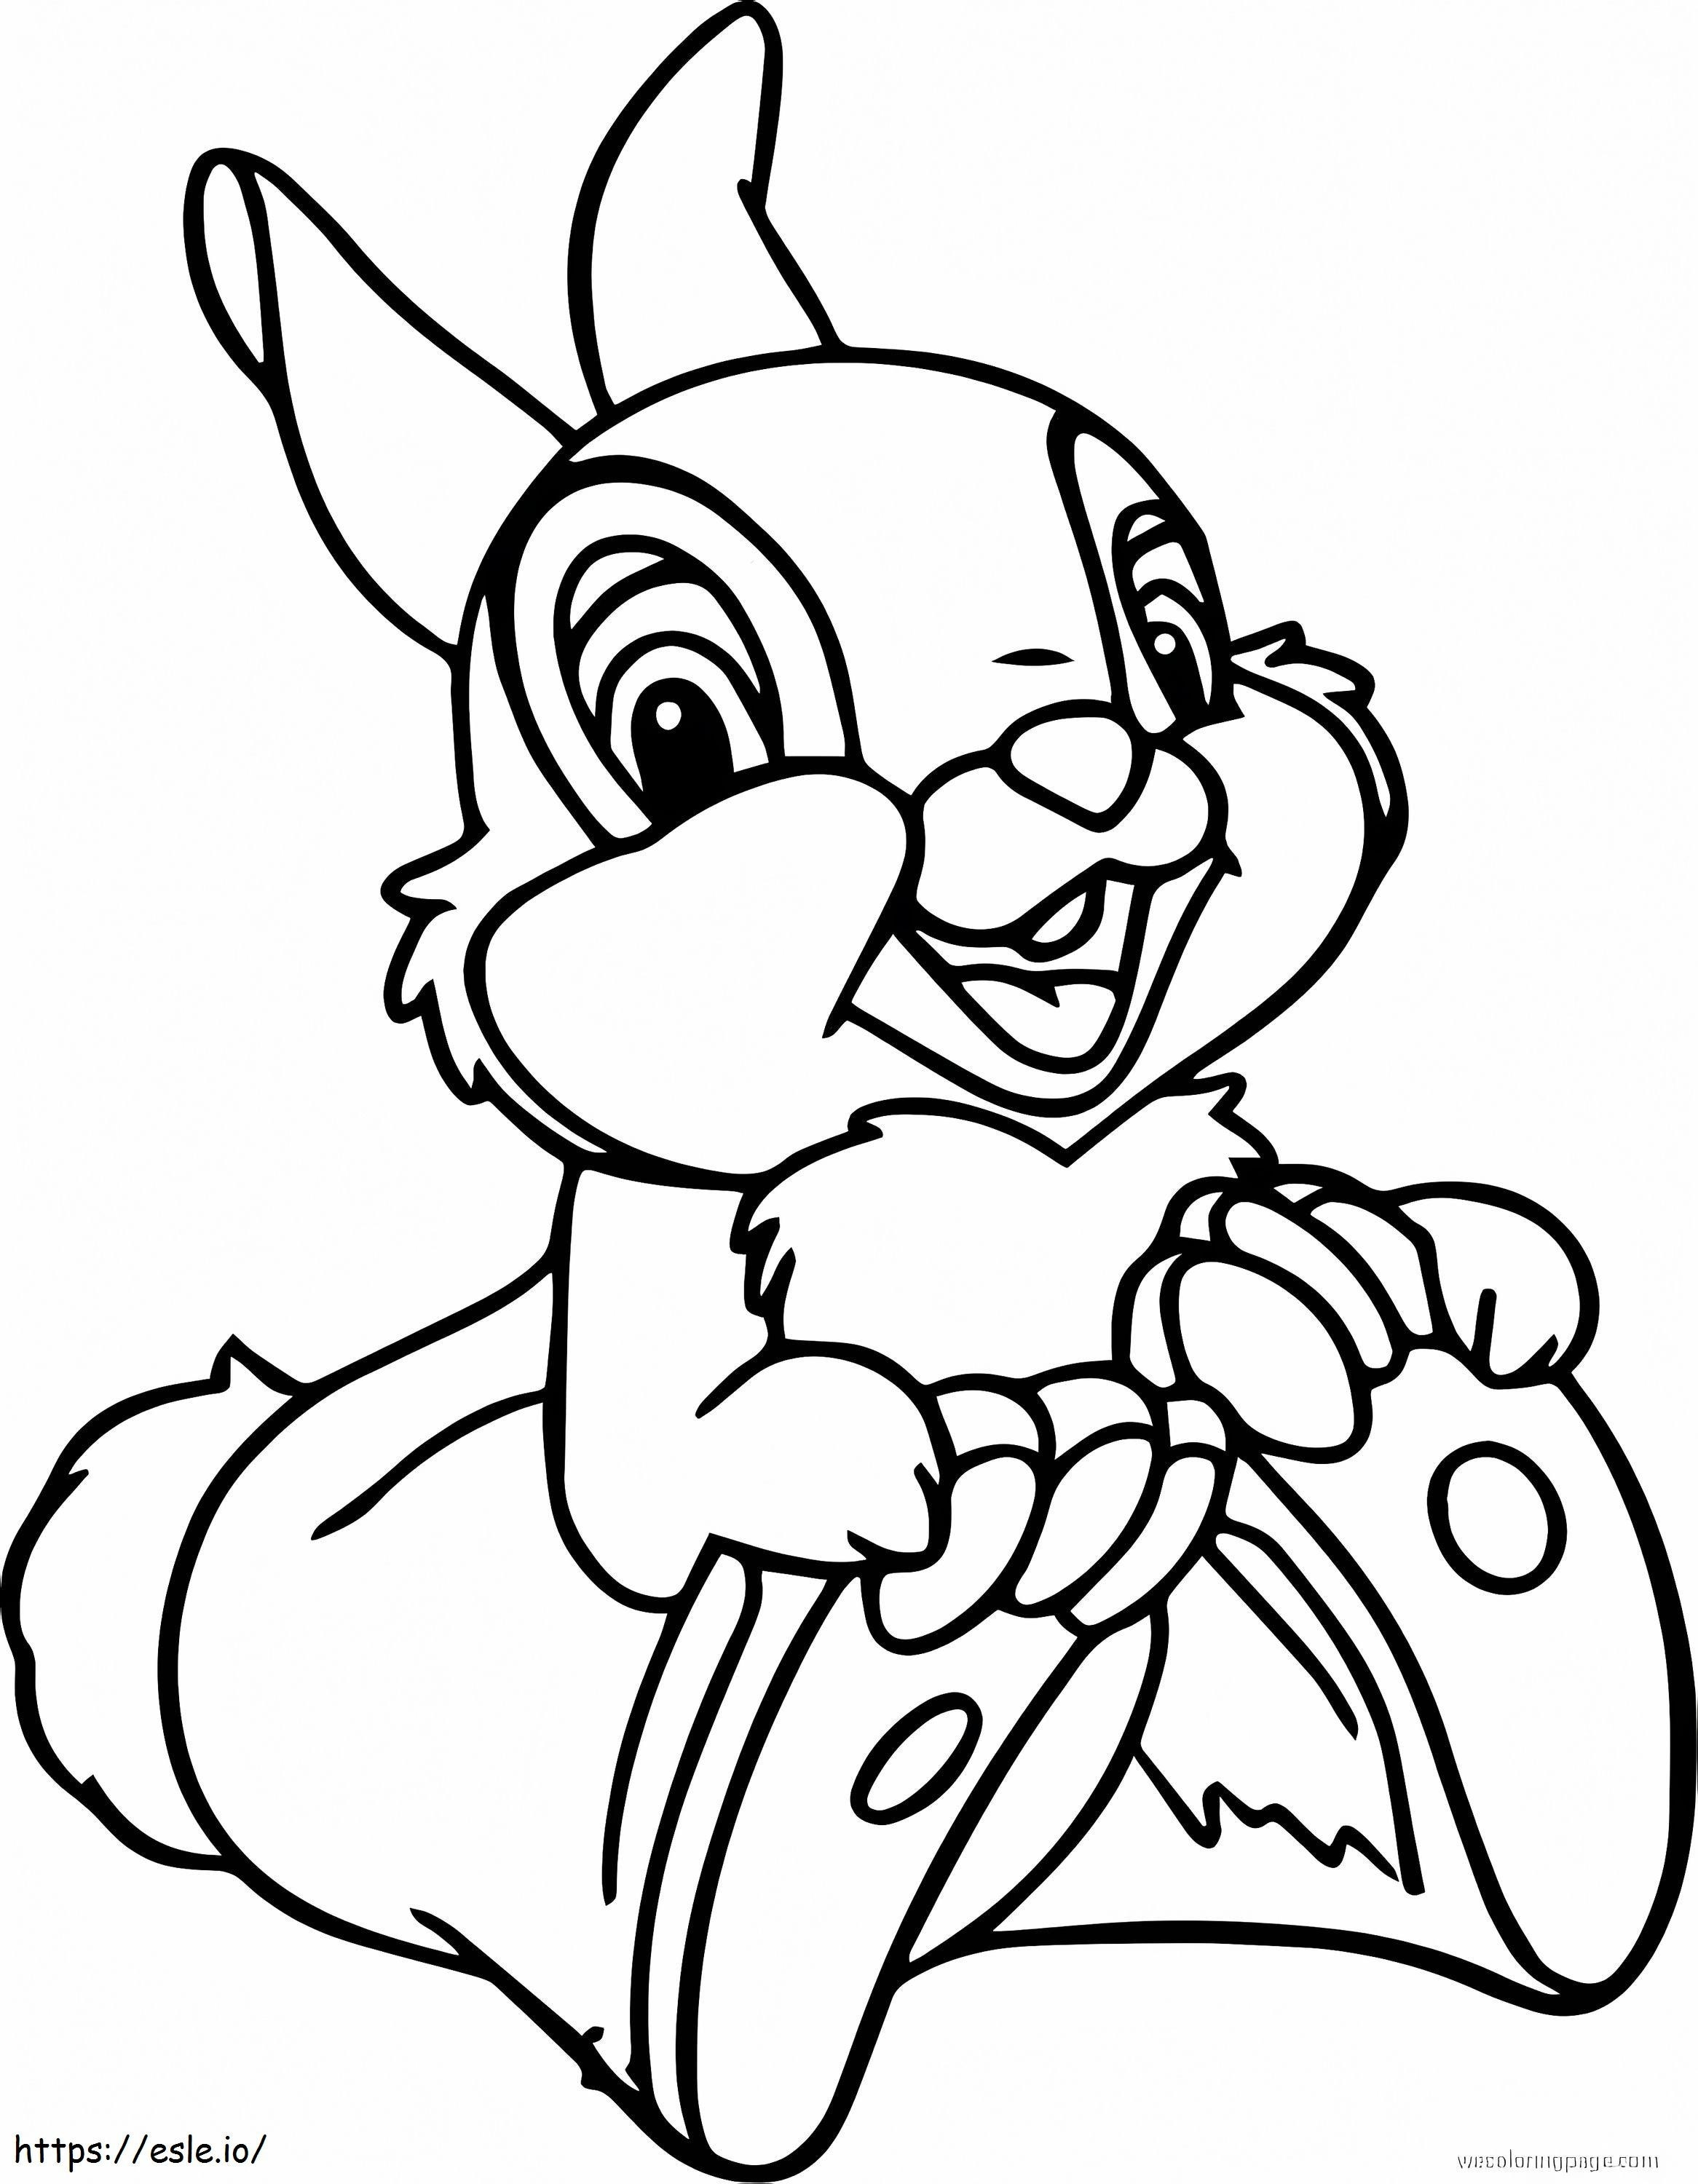 Cute Thumper coloring page